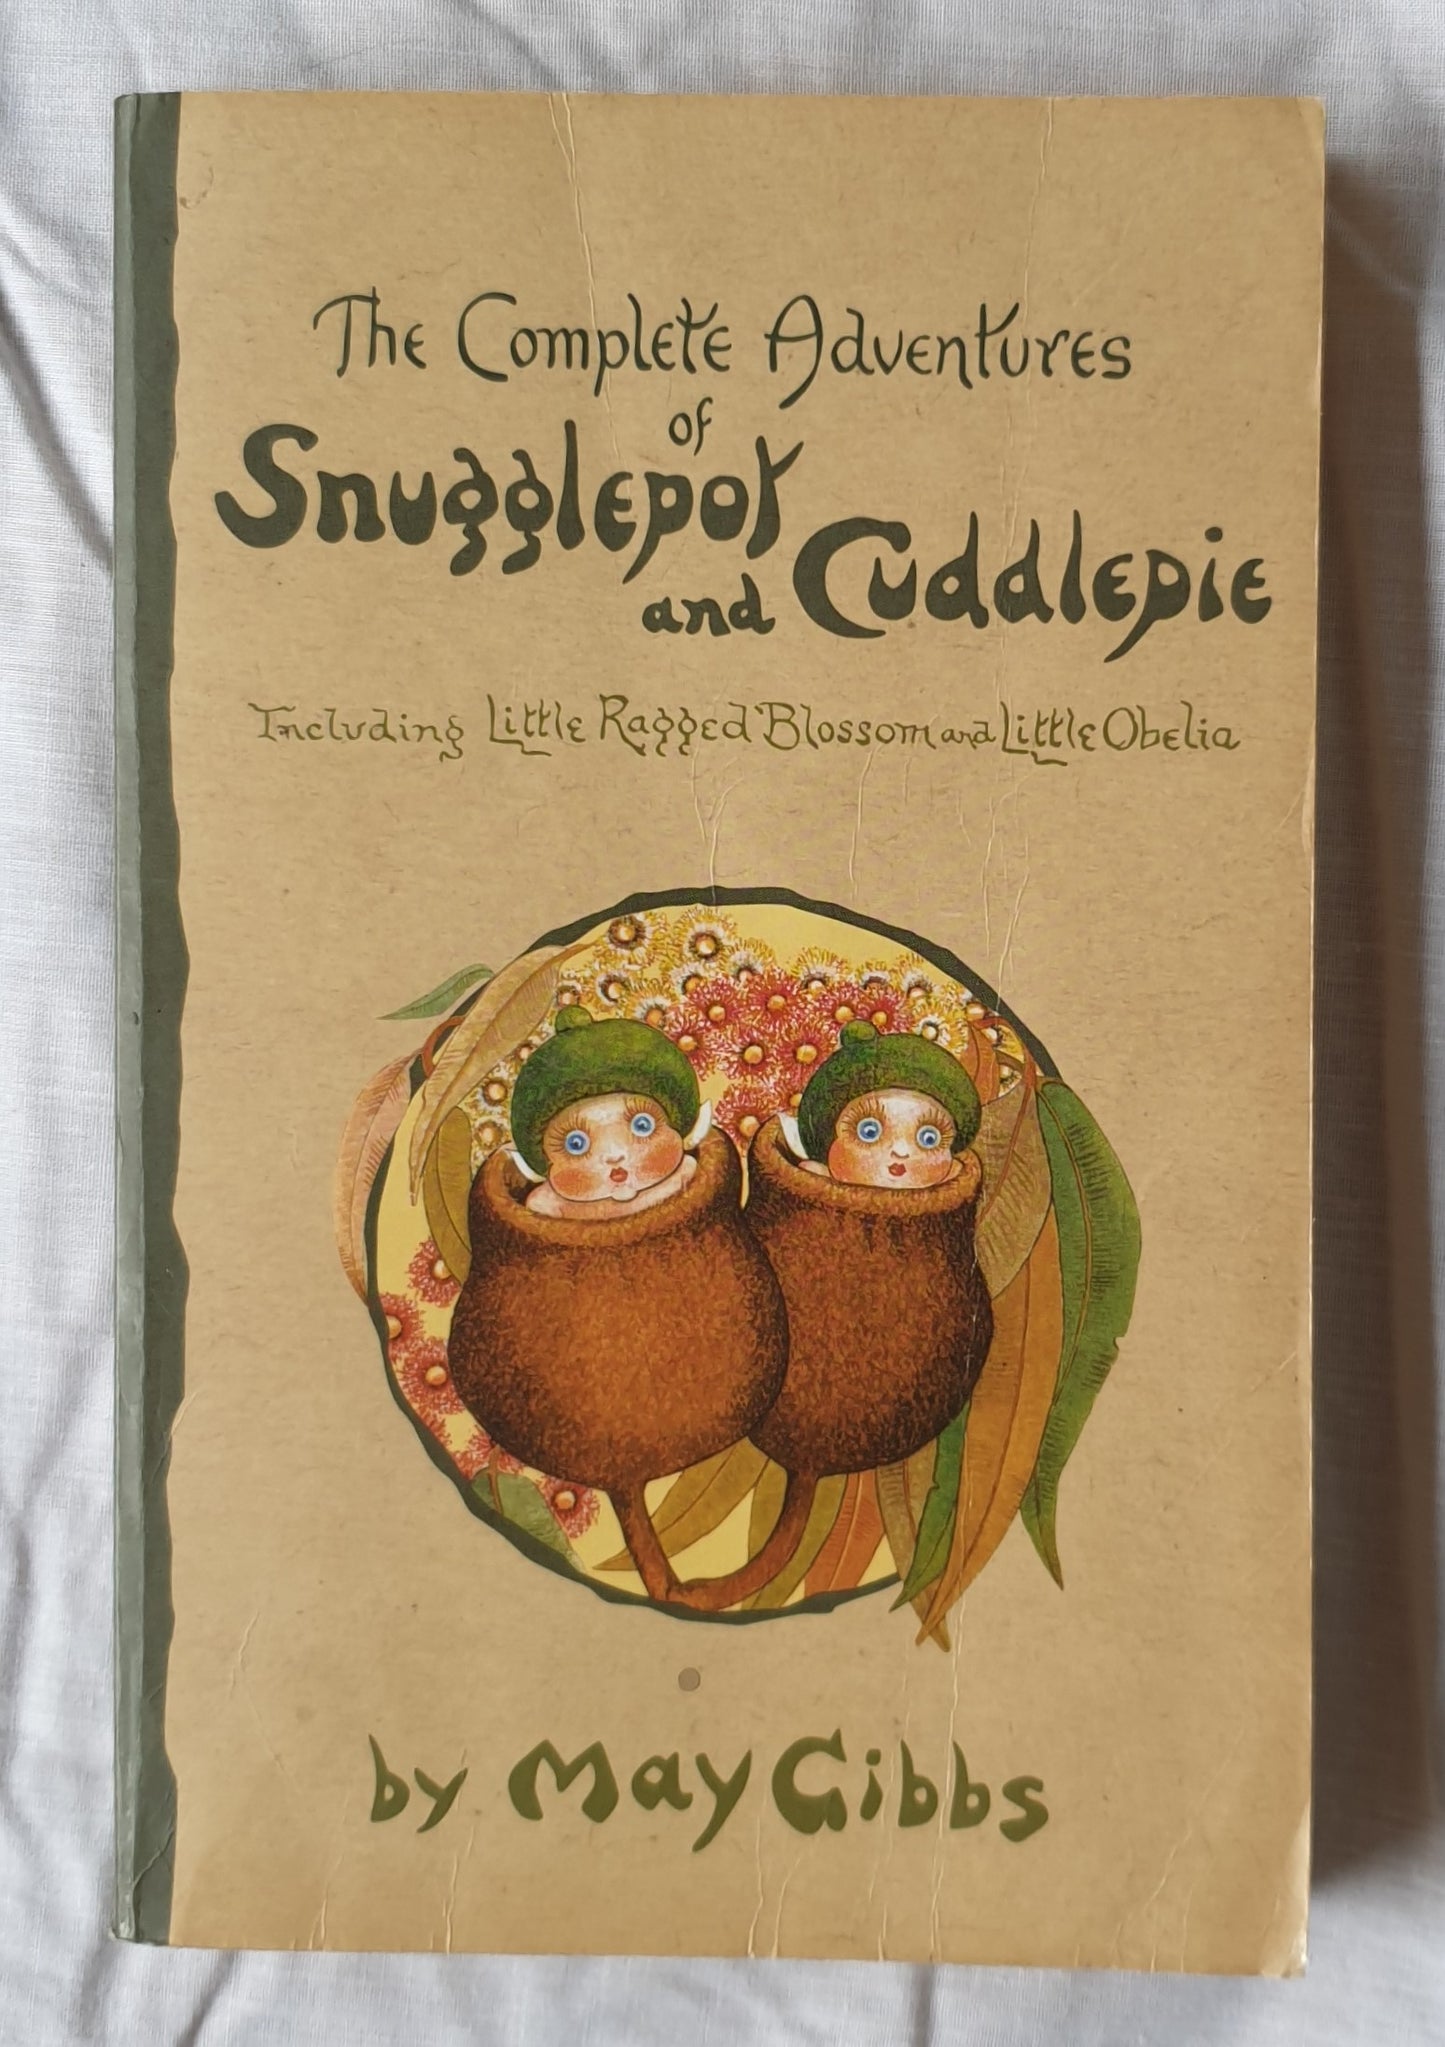 The Complete Adventures of Snugglepot and Cuddlepie  Including Little Ragged Blossom and Little Obelia  by May Gibbs